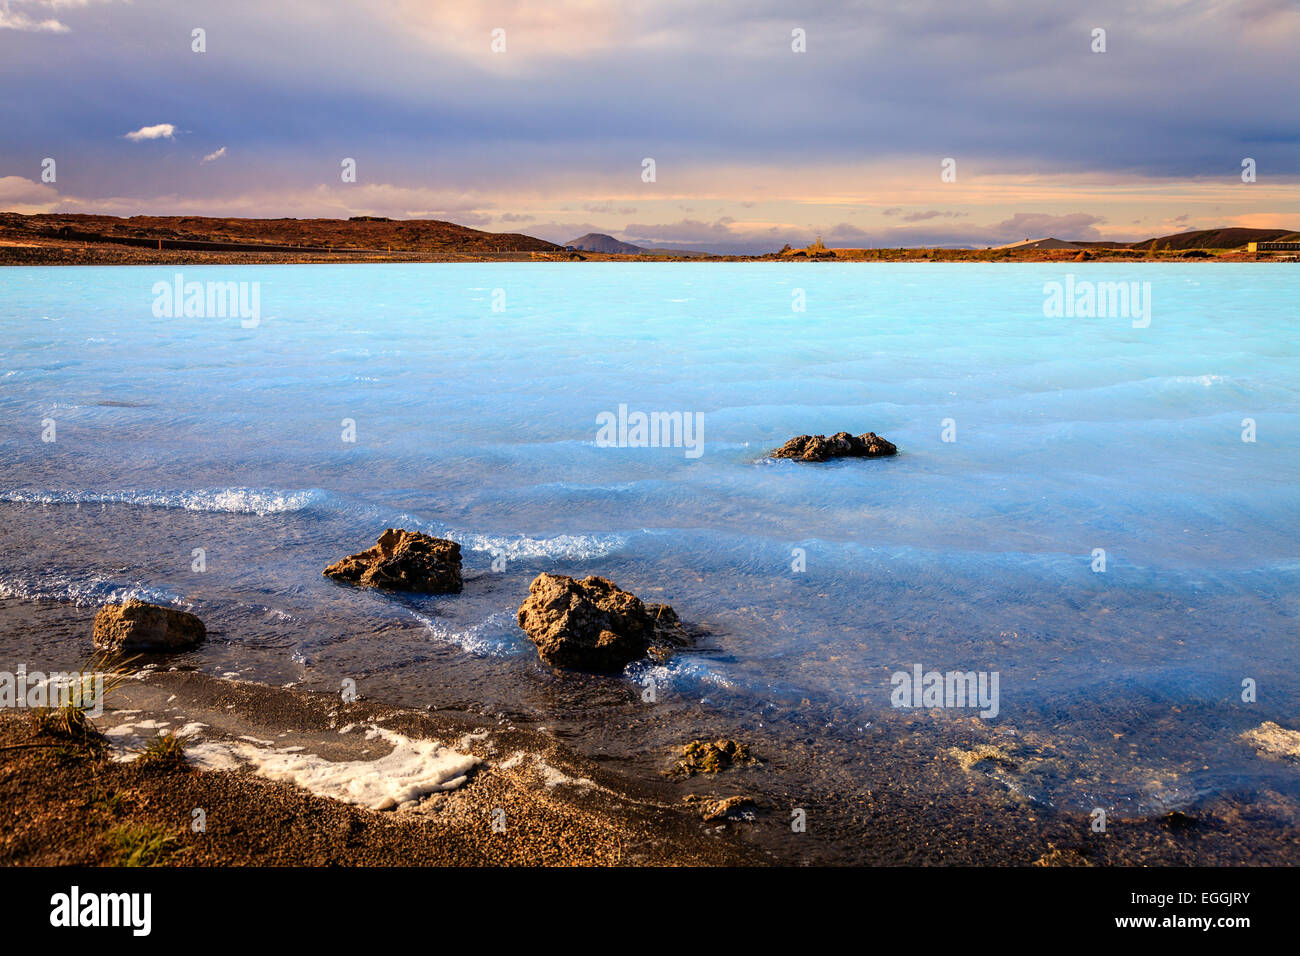 Hot water lake near Hverir geothermal area in Iceland Stock Photo